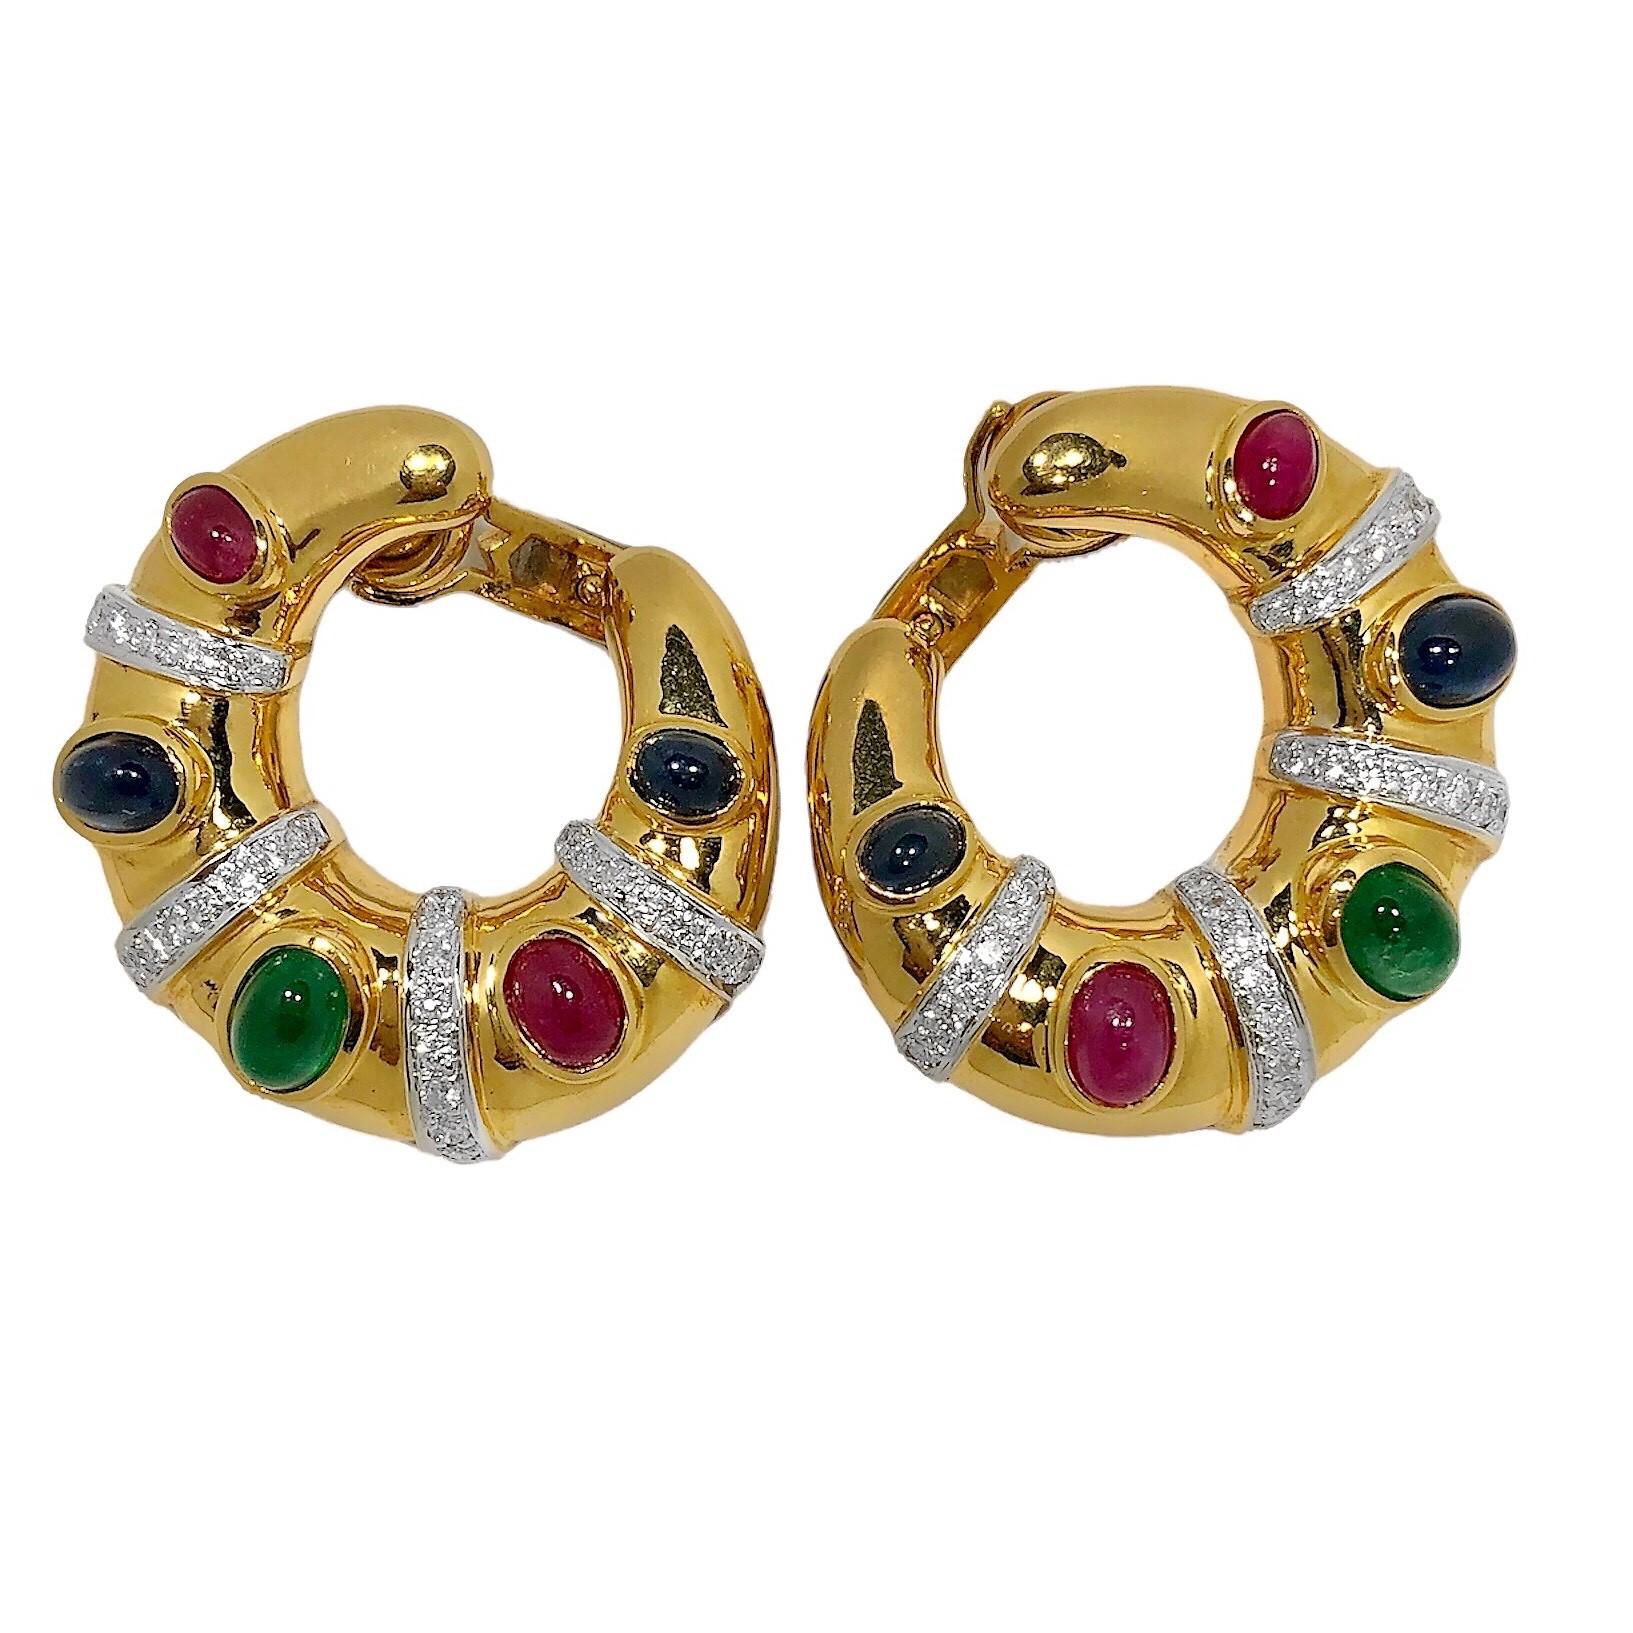 This eye catching pair of vintage 18k yellow gold hoops are each bezel set with five vibrant cabochon stones; emeralds, rubies and sapphires, that
are separated by rhodium strips of brilliant cut diamonds. Total approximate precious stone weight is